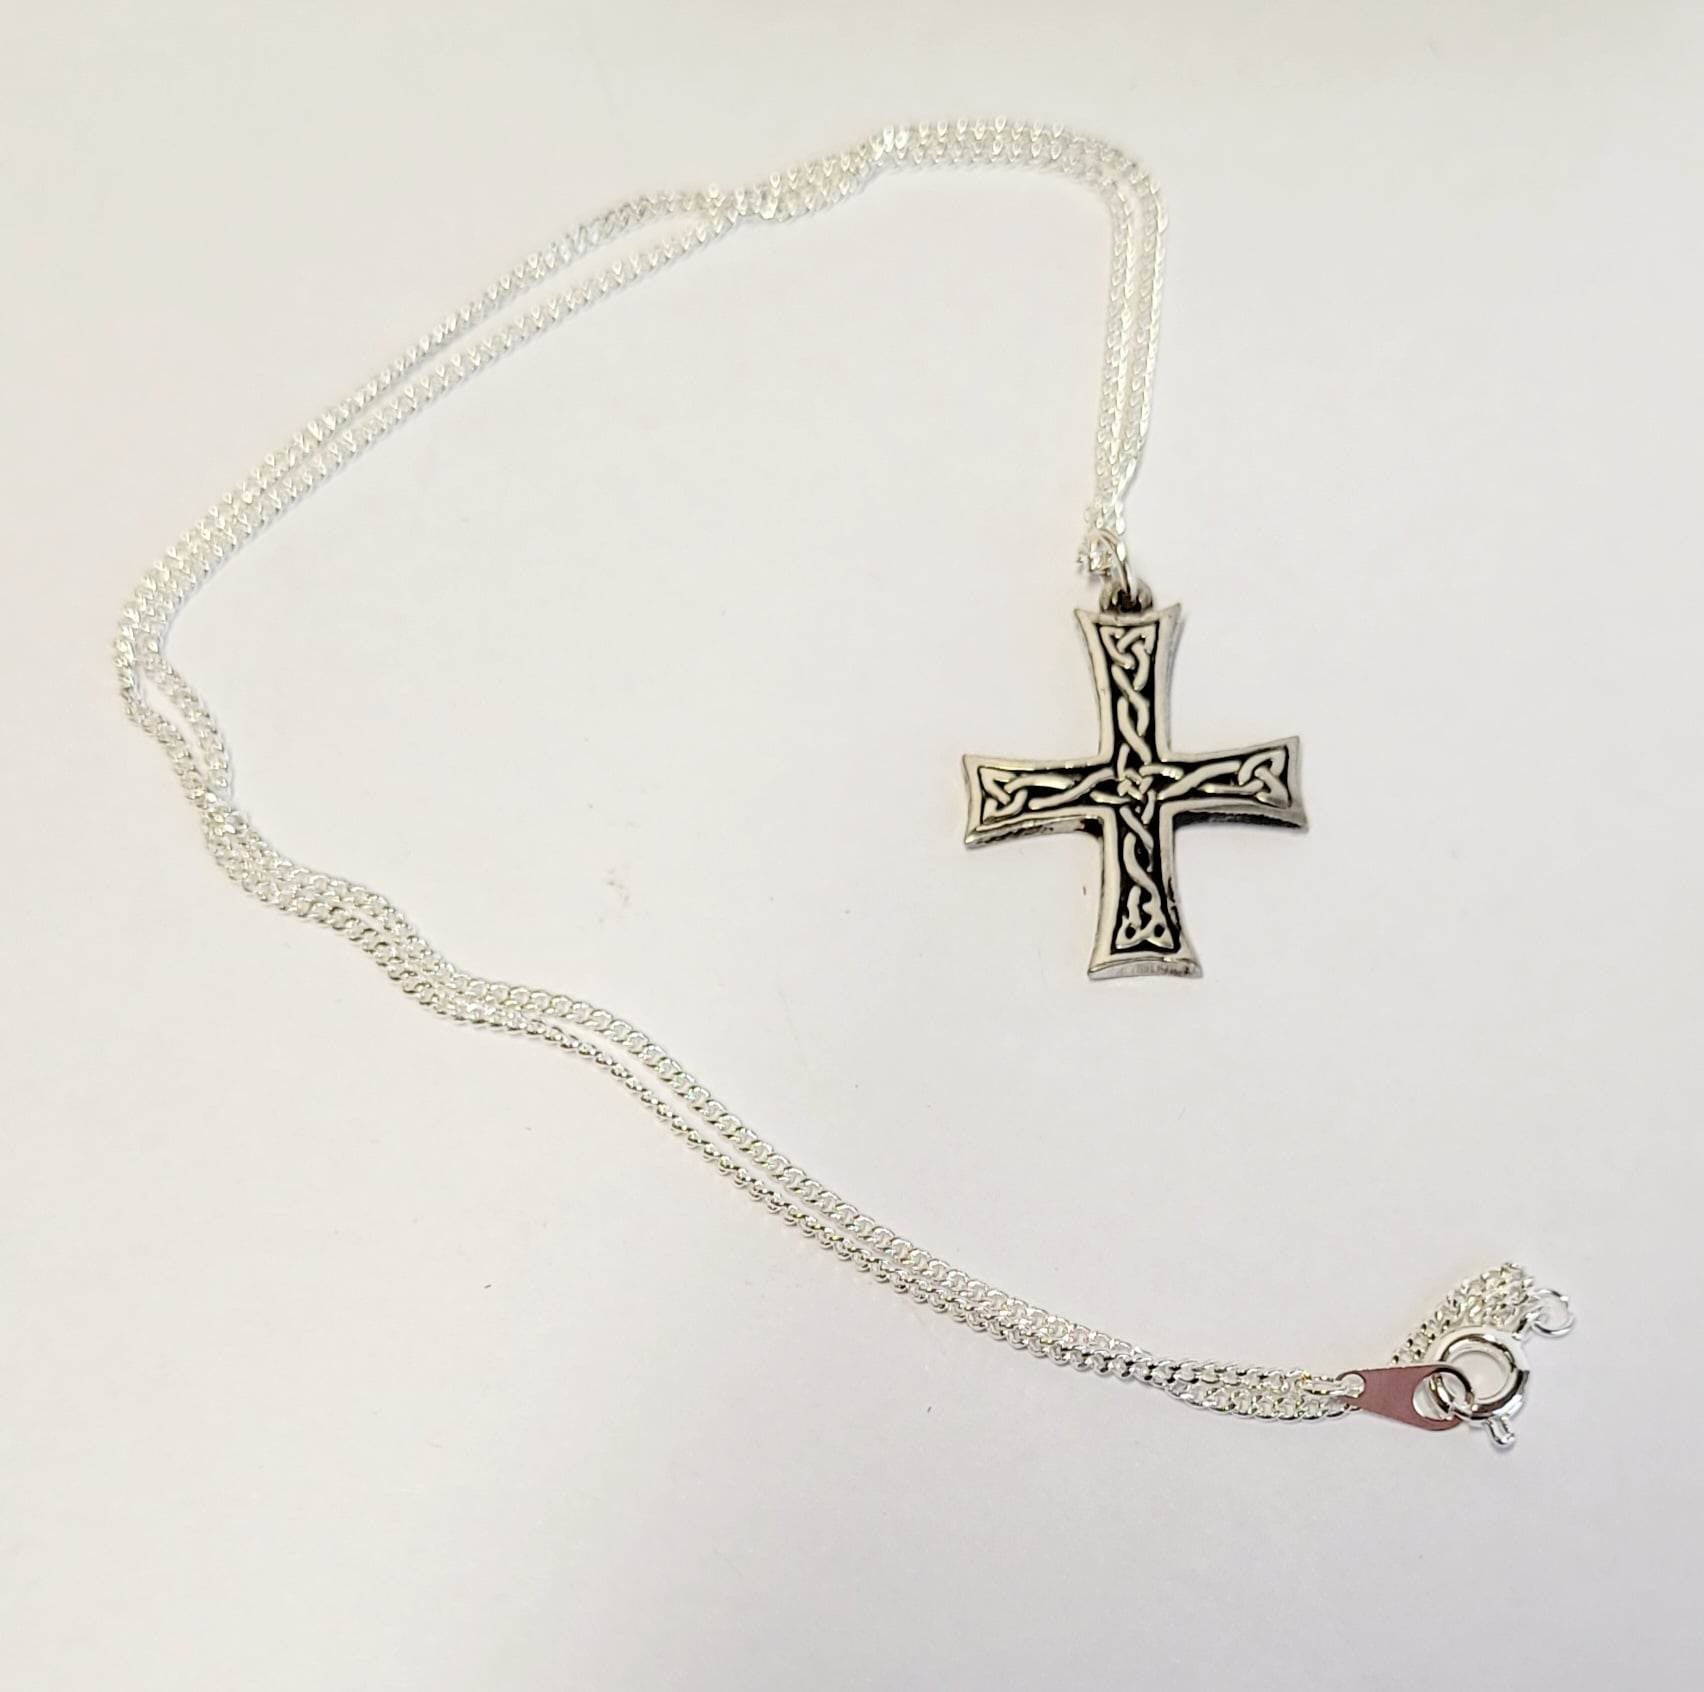 Innishmurray Cross Necklace by Bandia Design